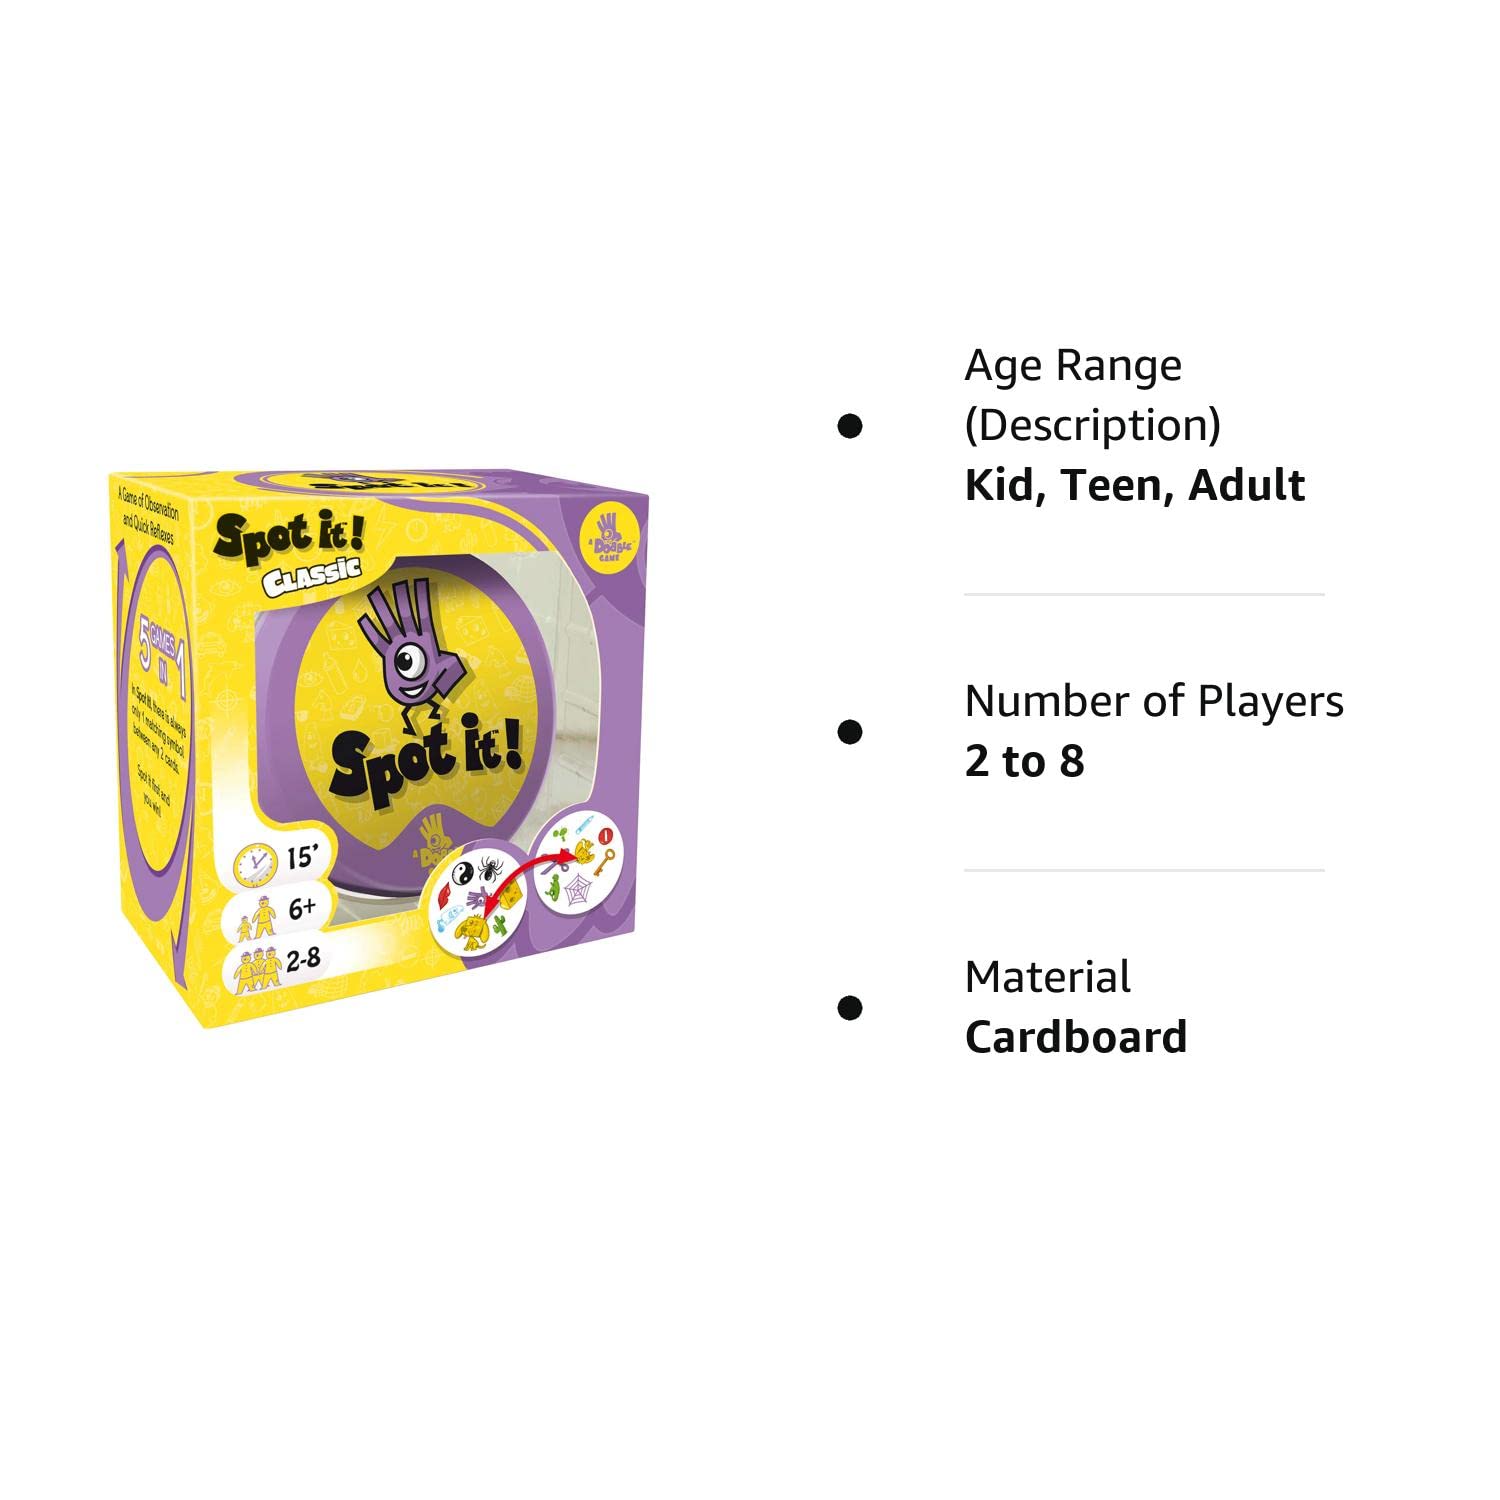 Spot It! Classic Card Game | Game for Kids | Age 6+ | 2 to 8 Players | Average Playtime 15 Minutes | Purple and Yellow Packaging | Made by Zygomatic